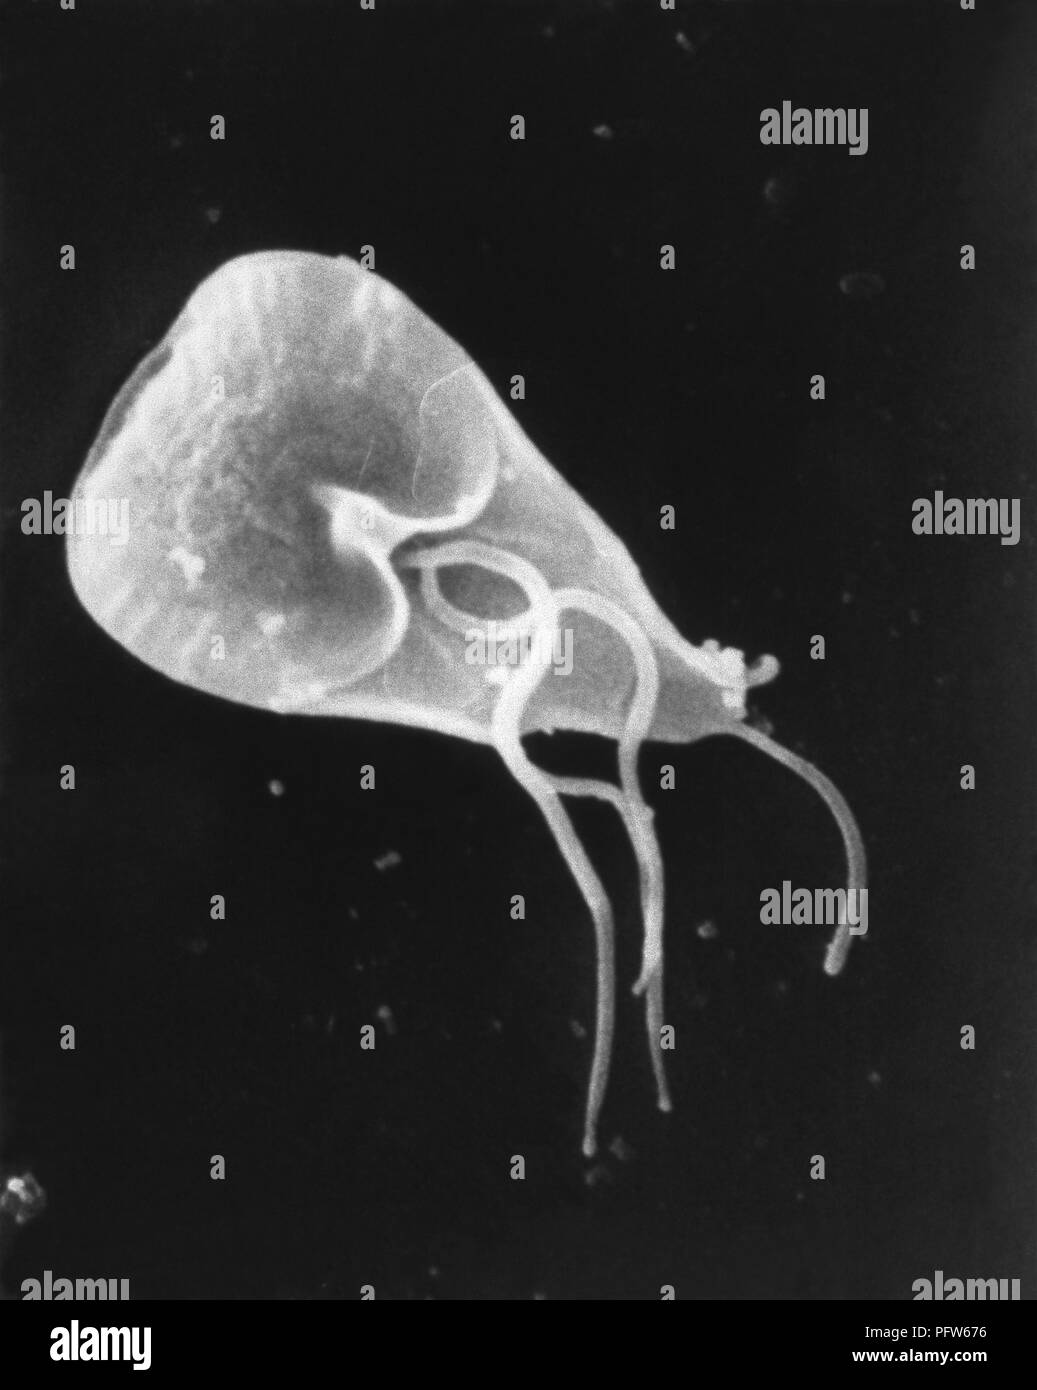 Giardia Lamblia parasite revealed in the photomicrograph image, 2006. Image courtesy Centers for Disease Control (CDC) / Janice Haney Carr. () Stock Photo